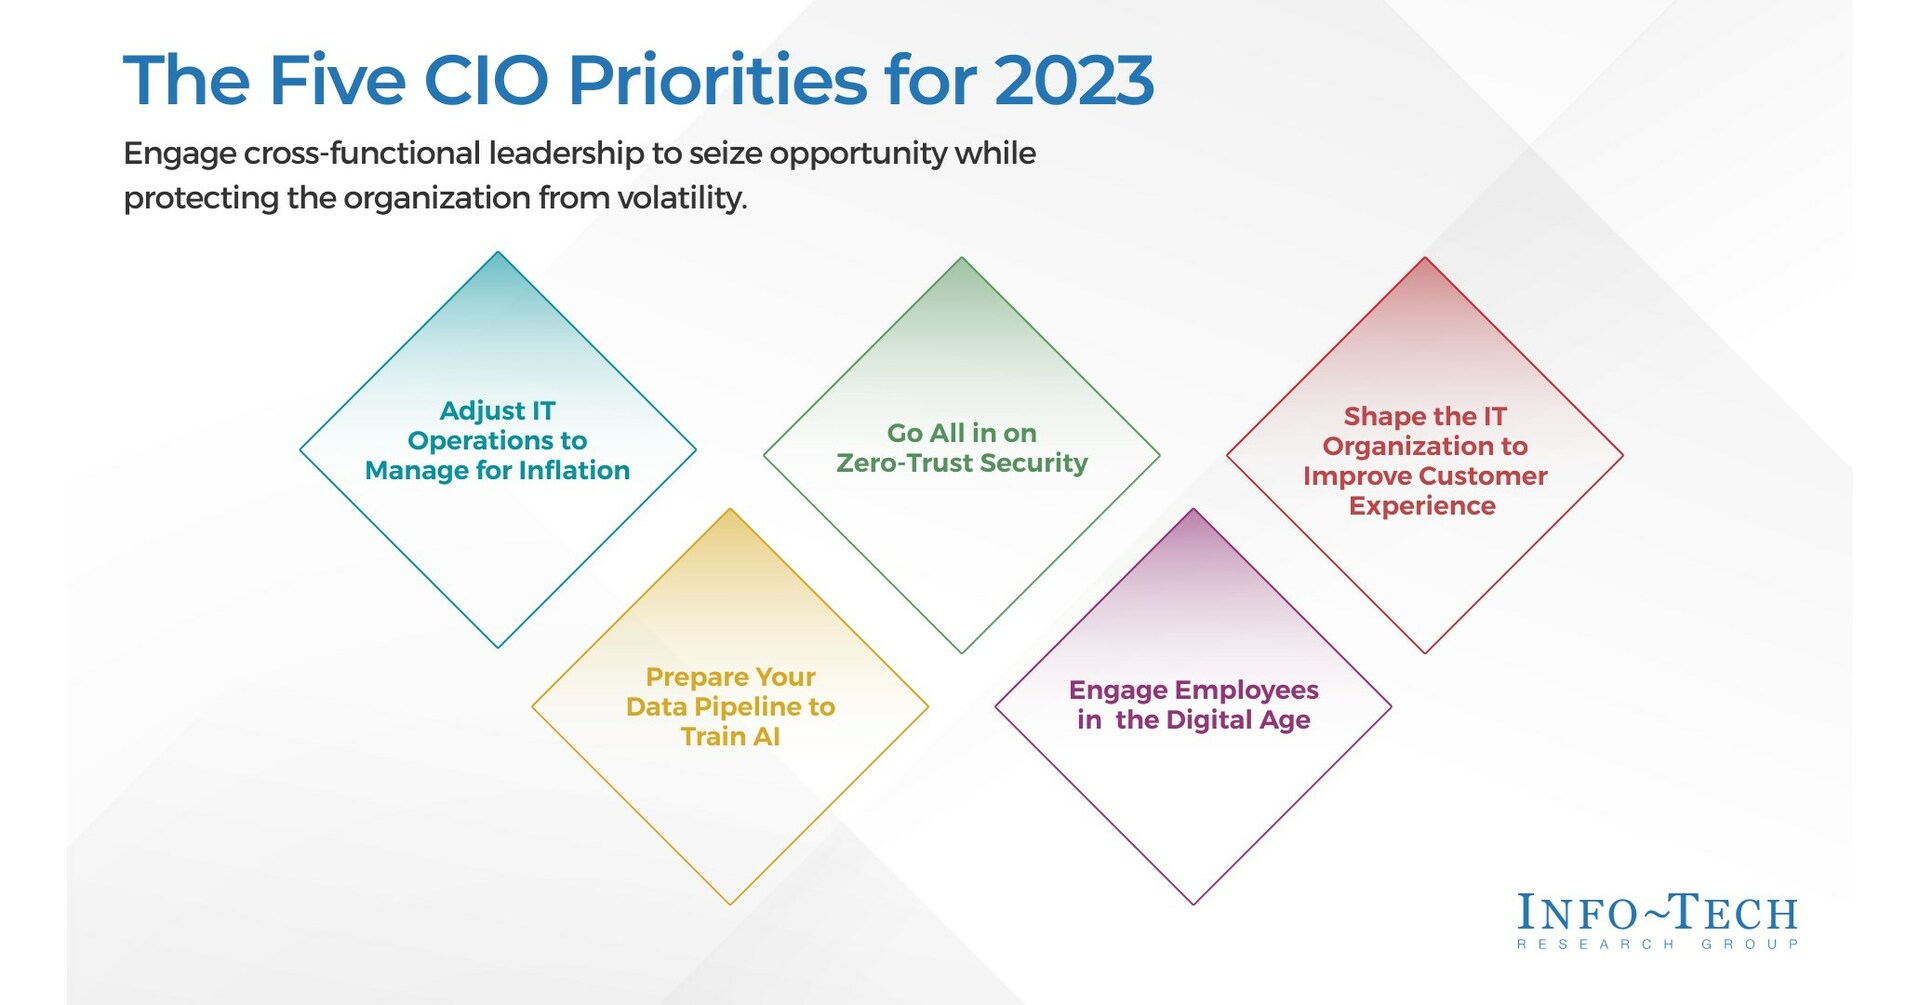 The Top CIO Priorities for 2023 Published in InfoTech Research Group's